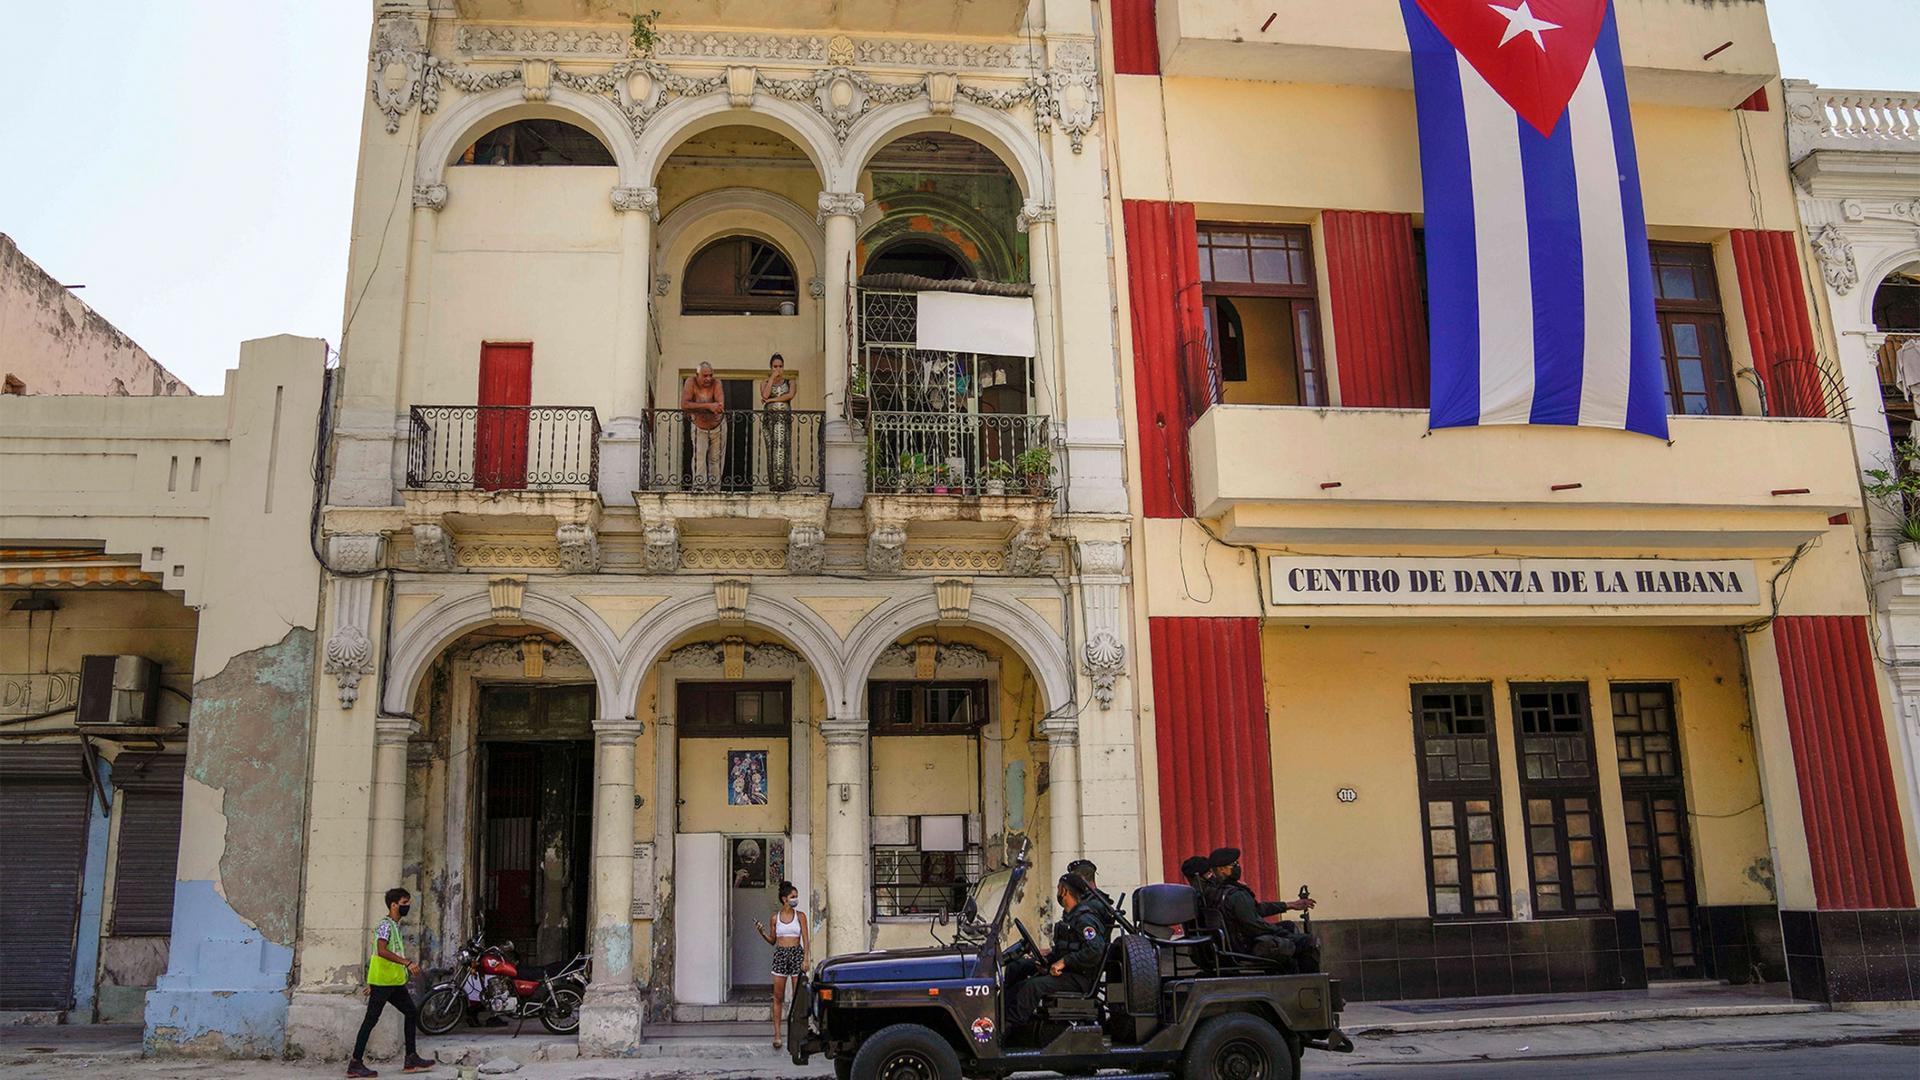 Special forces police patrol the streets as they drive past a large Cuban flag hanging from the facade of a building, in Havana, Cuba